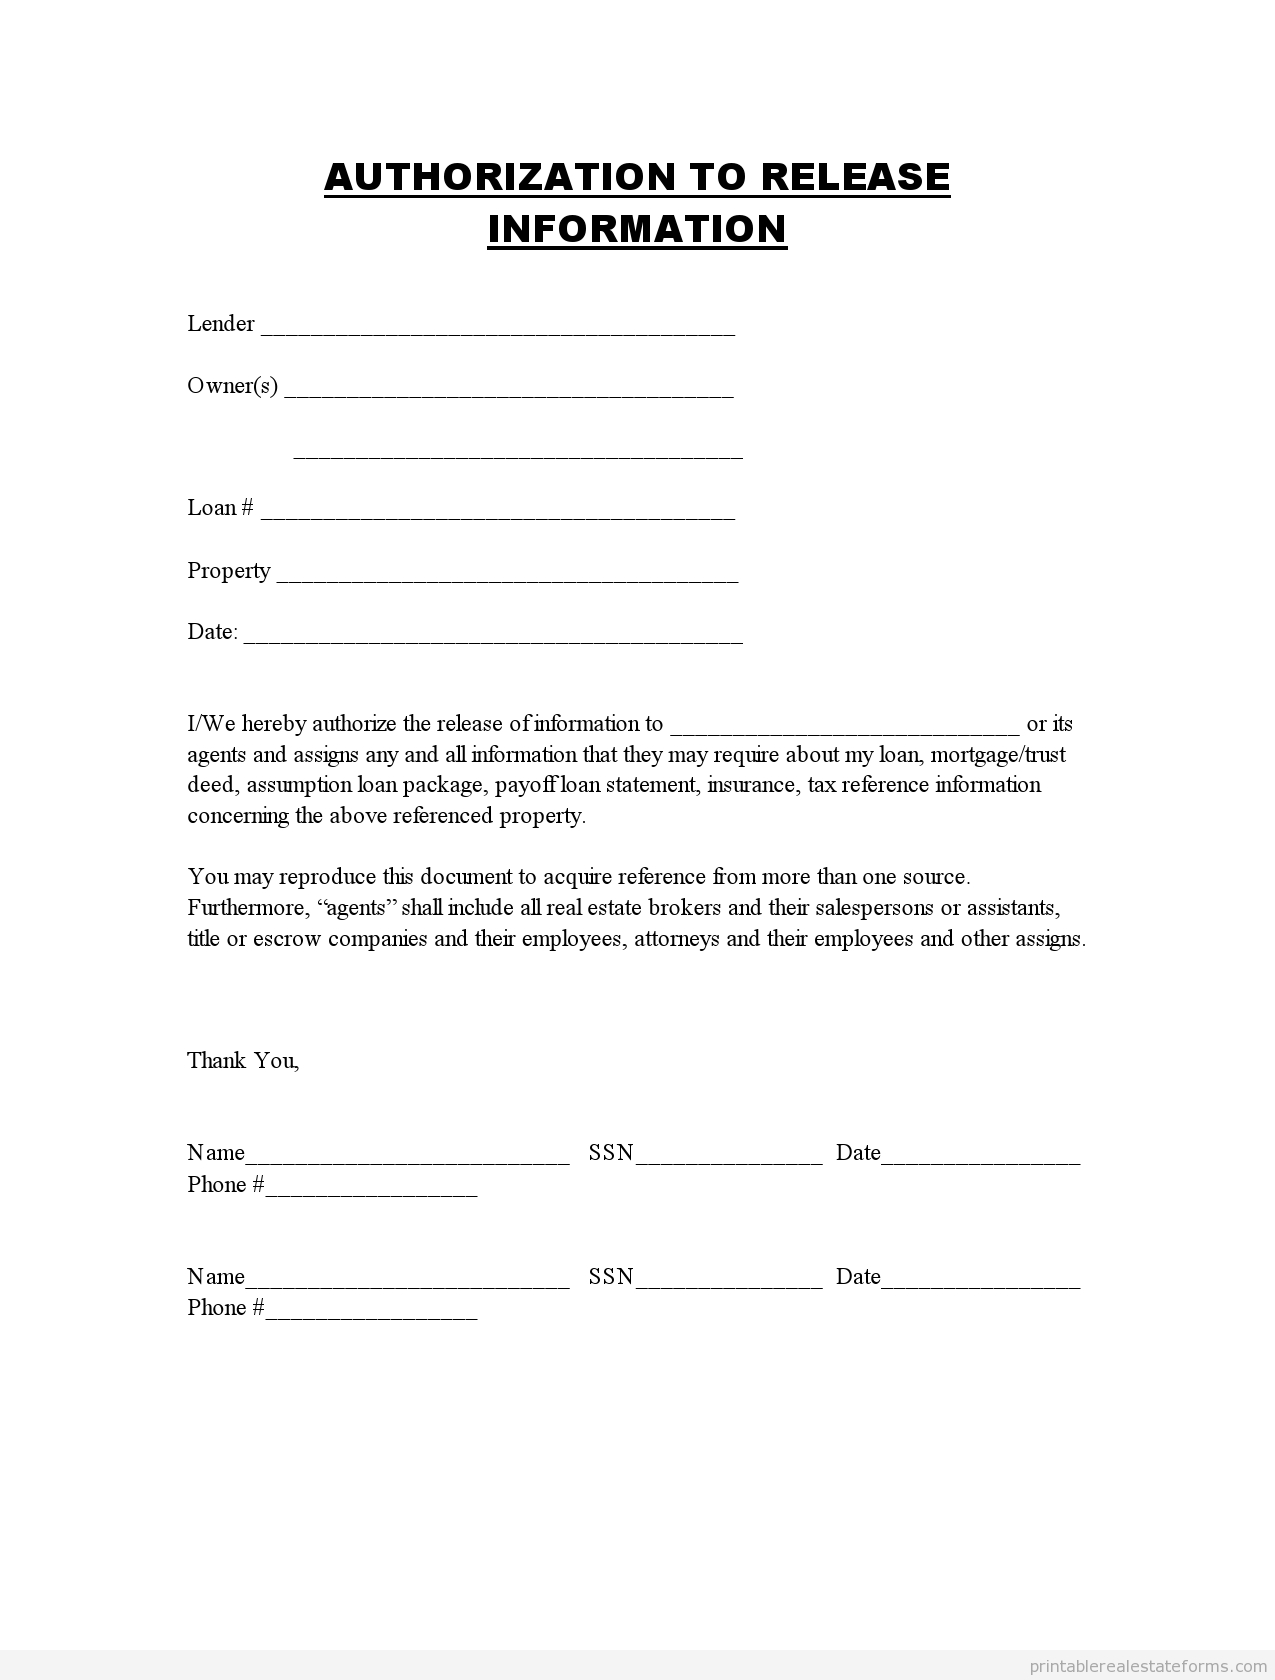 Printable Authorization To Release Information Template 2015 Inside Blank Legal Document Template